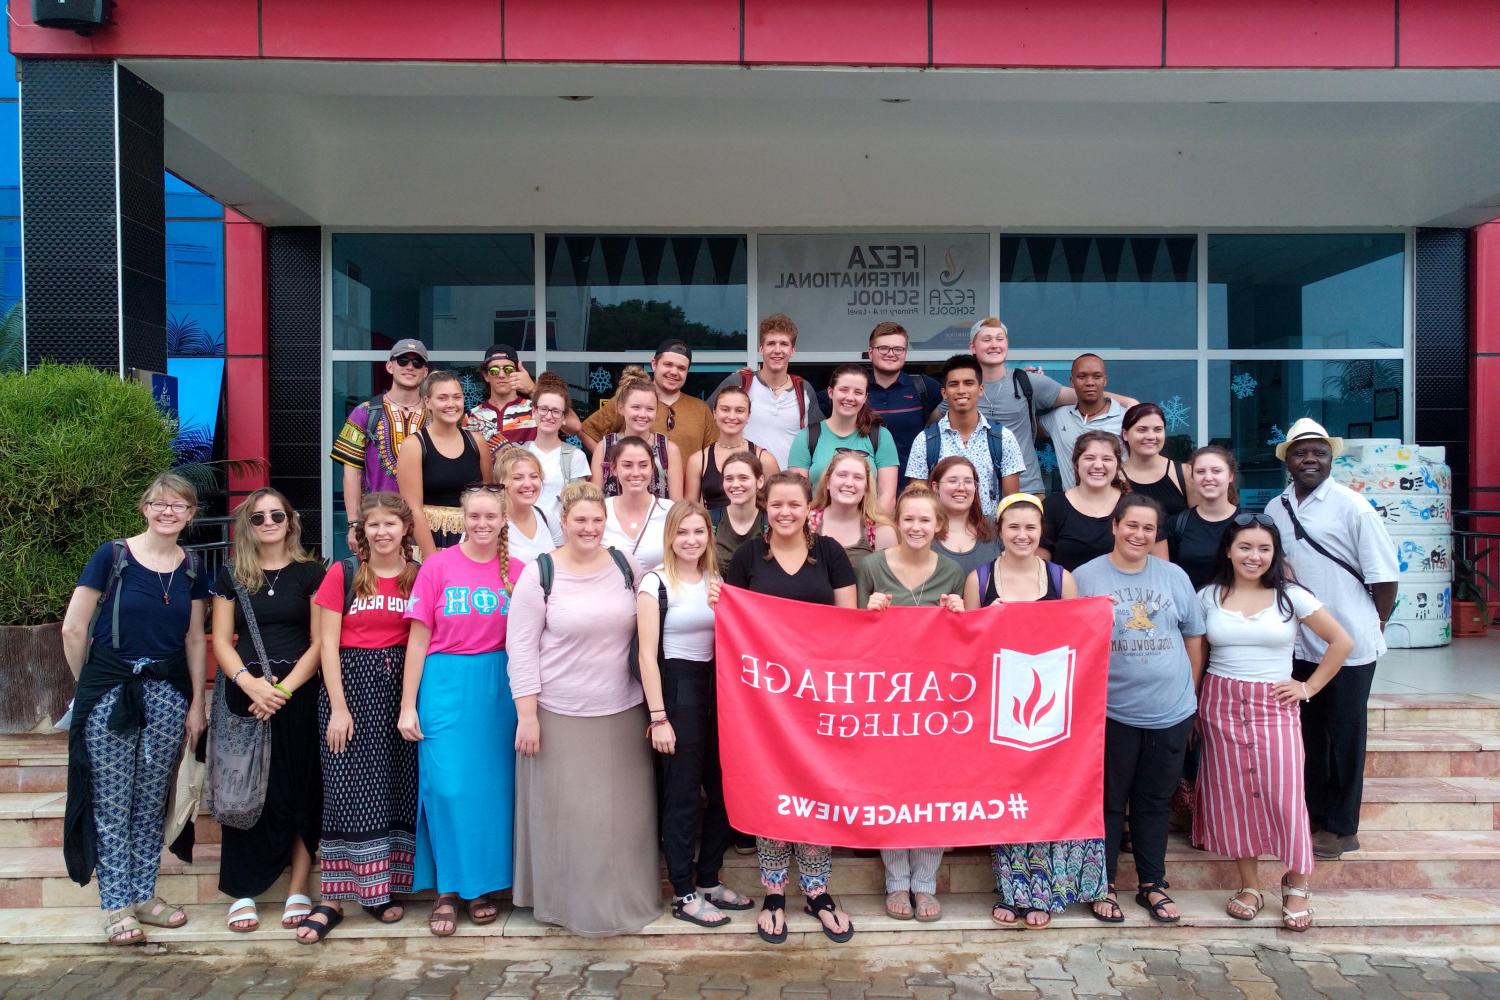 A group photo of students in front of FEZA International School on the study tour to Tanzania.